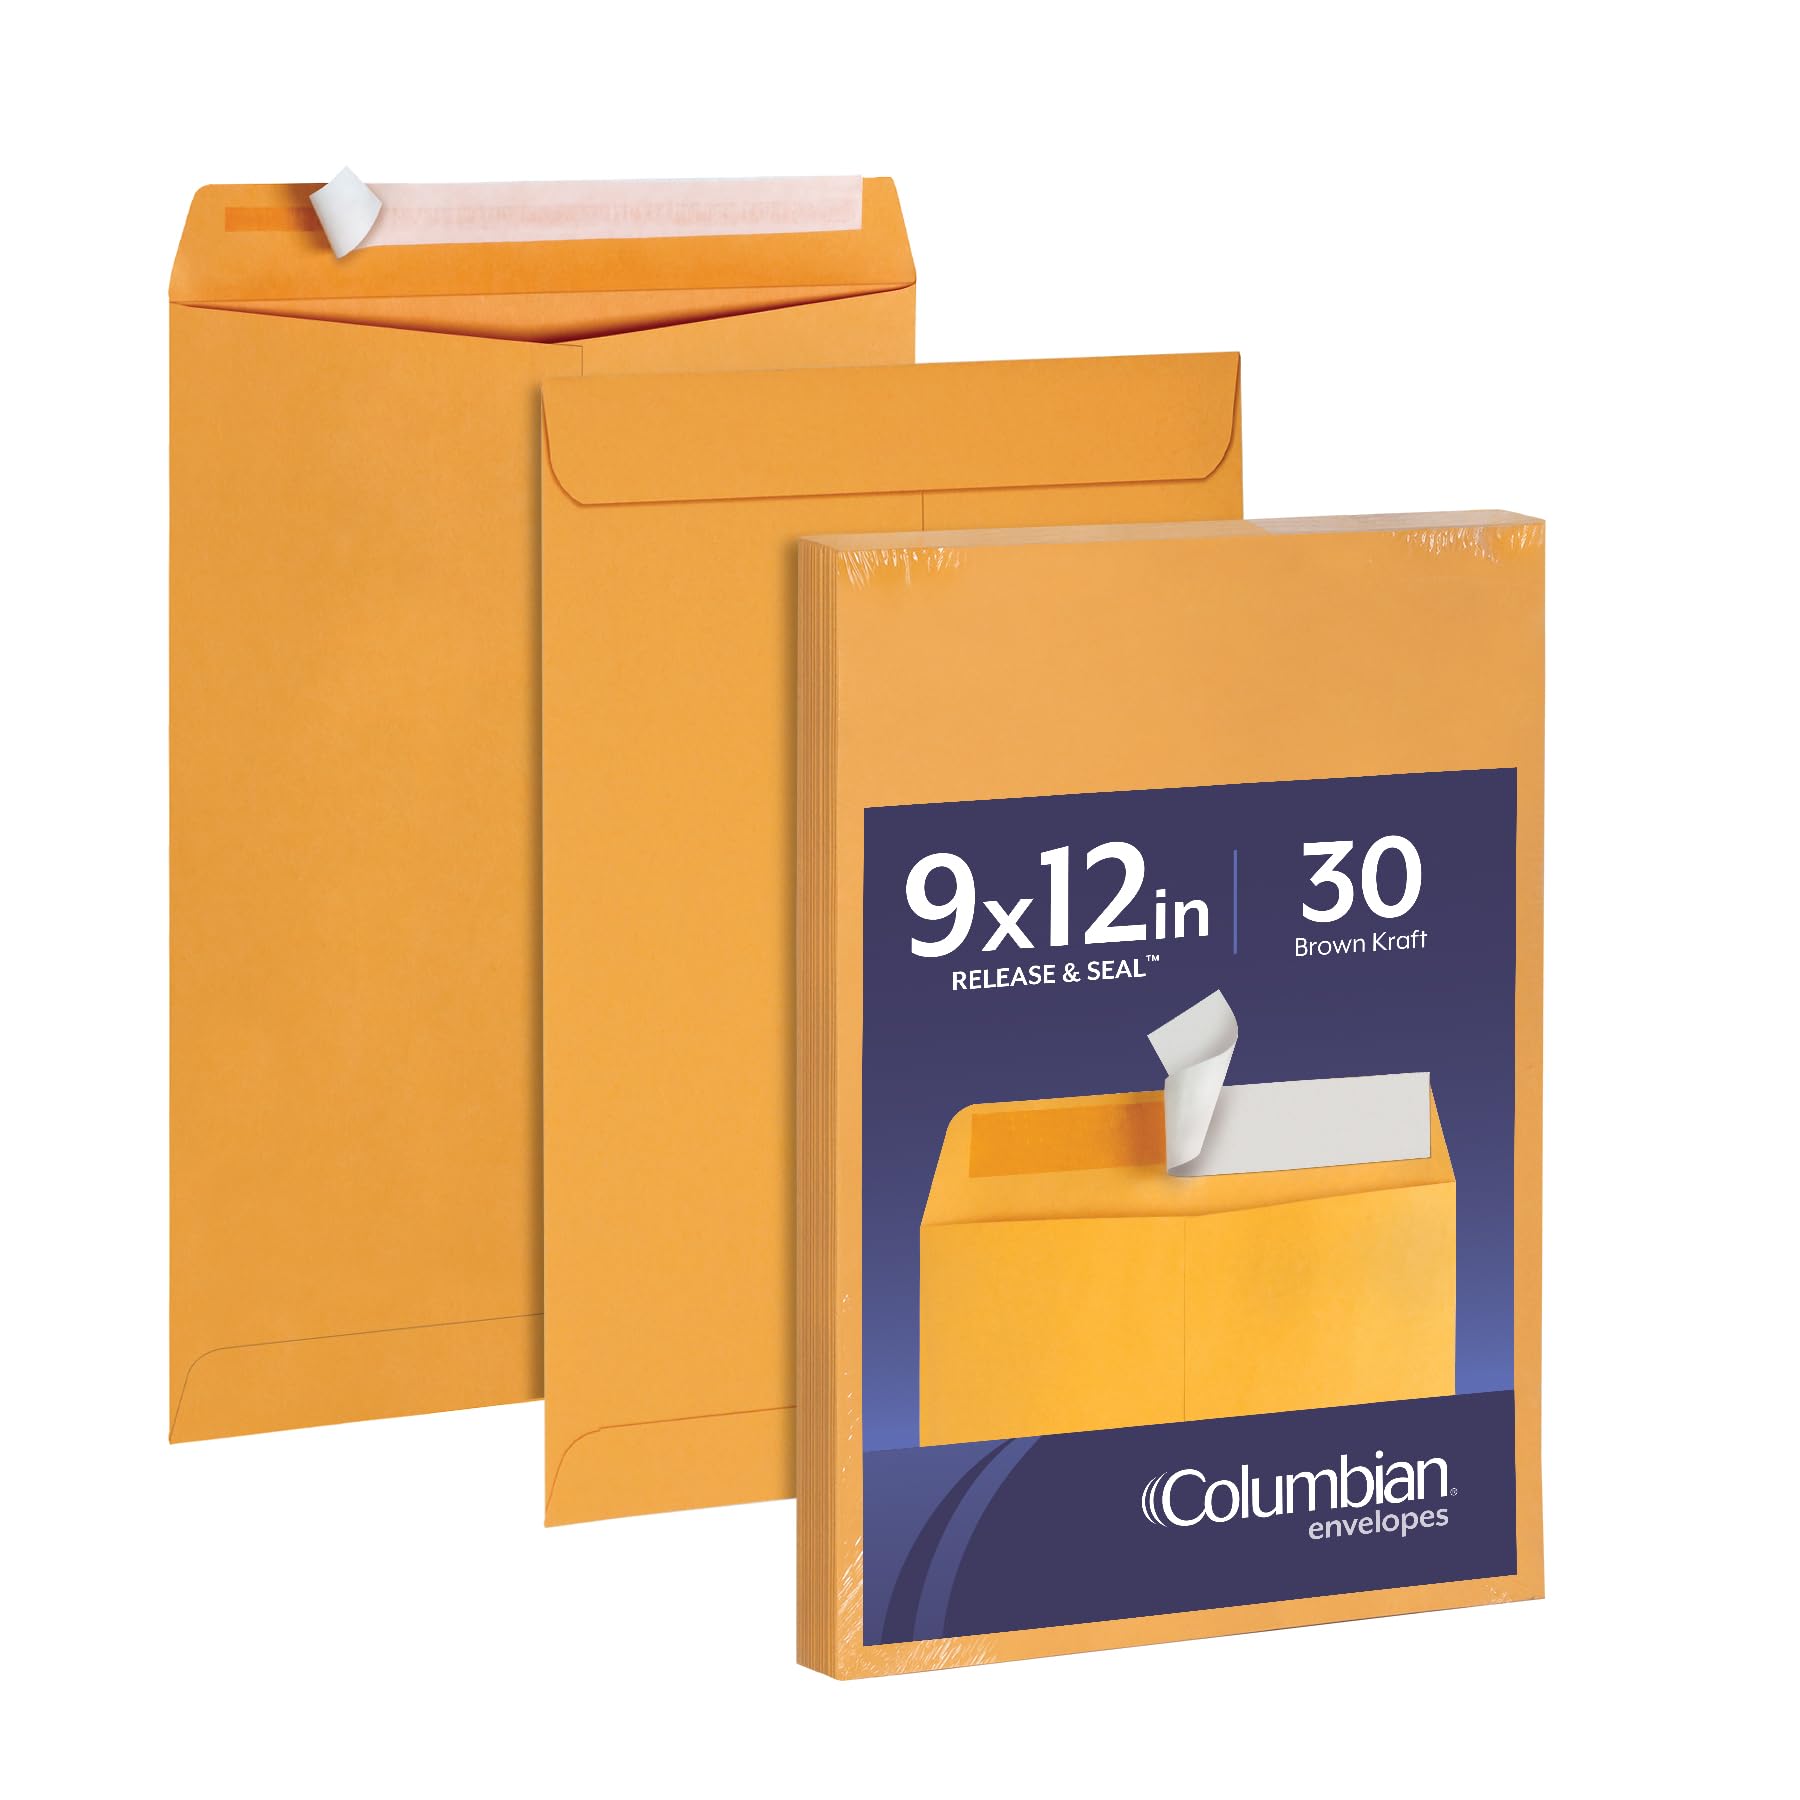 Columbian 9 x 12 Catalog Envelopes with Self Seal Closure, 28 lb Brown Kraft, for Mailing Flat Letter Size Documents or Photos, 30 Per Pack (COLO401)